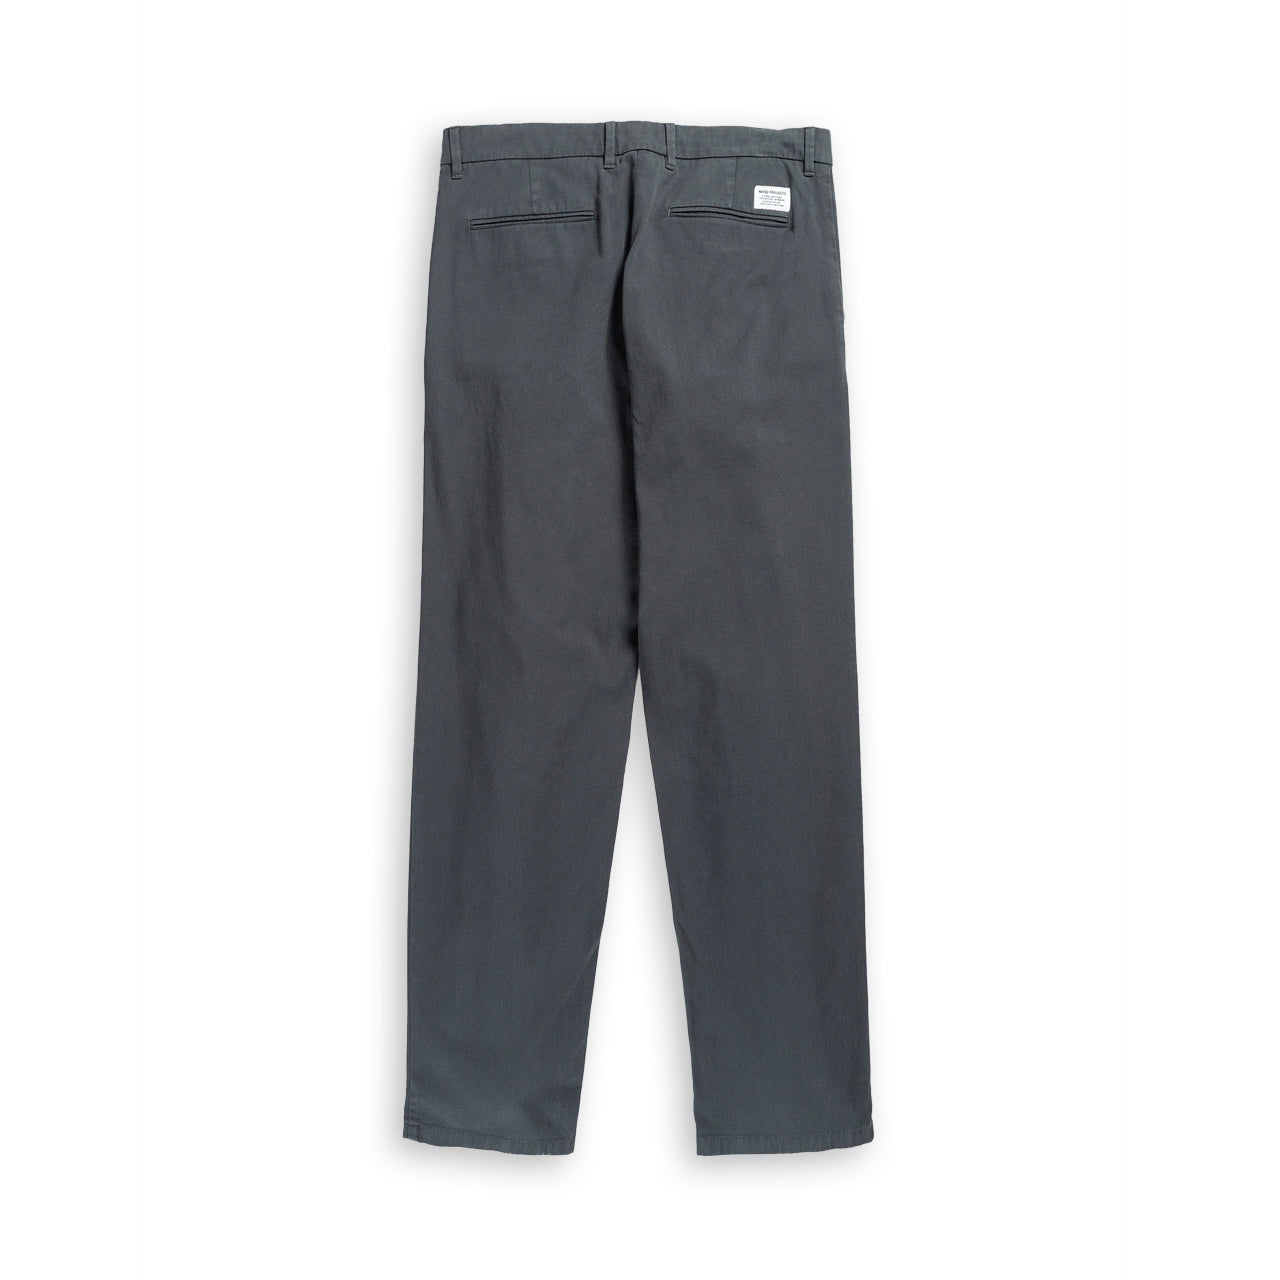 Norse Projects Aros Regular Light Stretch | Uncrate Supply